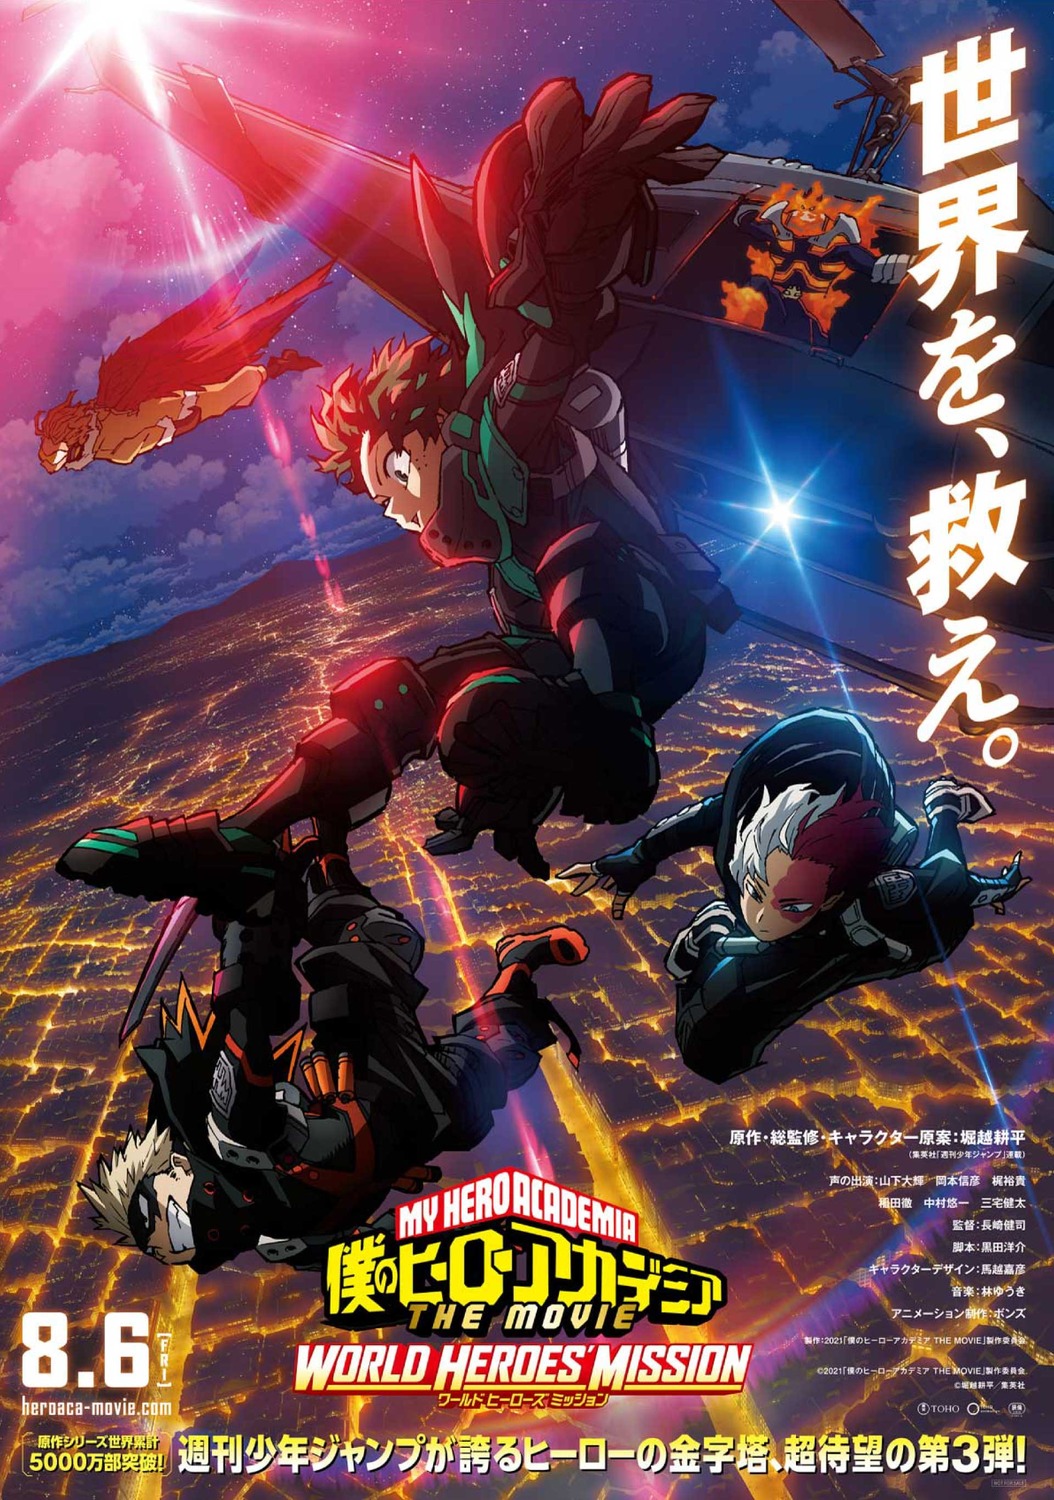 Extra Large Movie Poster Image for Boku no Hero Academia: World Heroes Mission (#2 of 2)